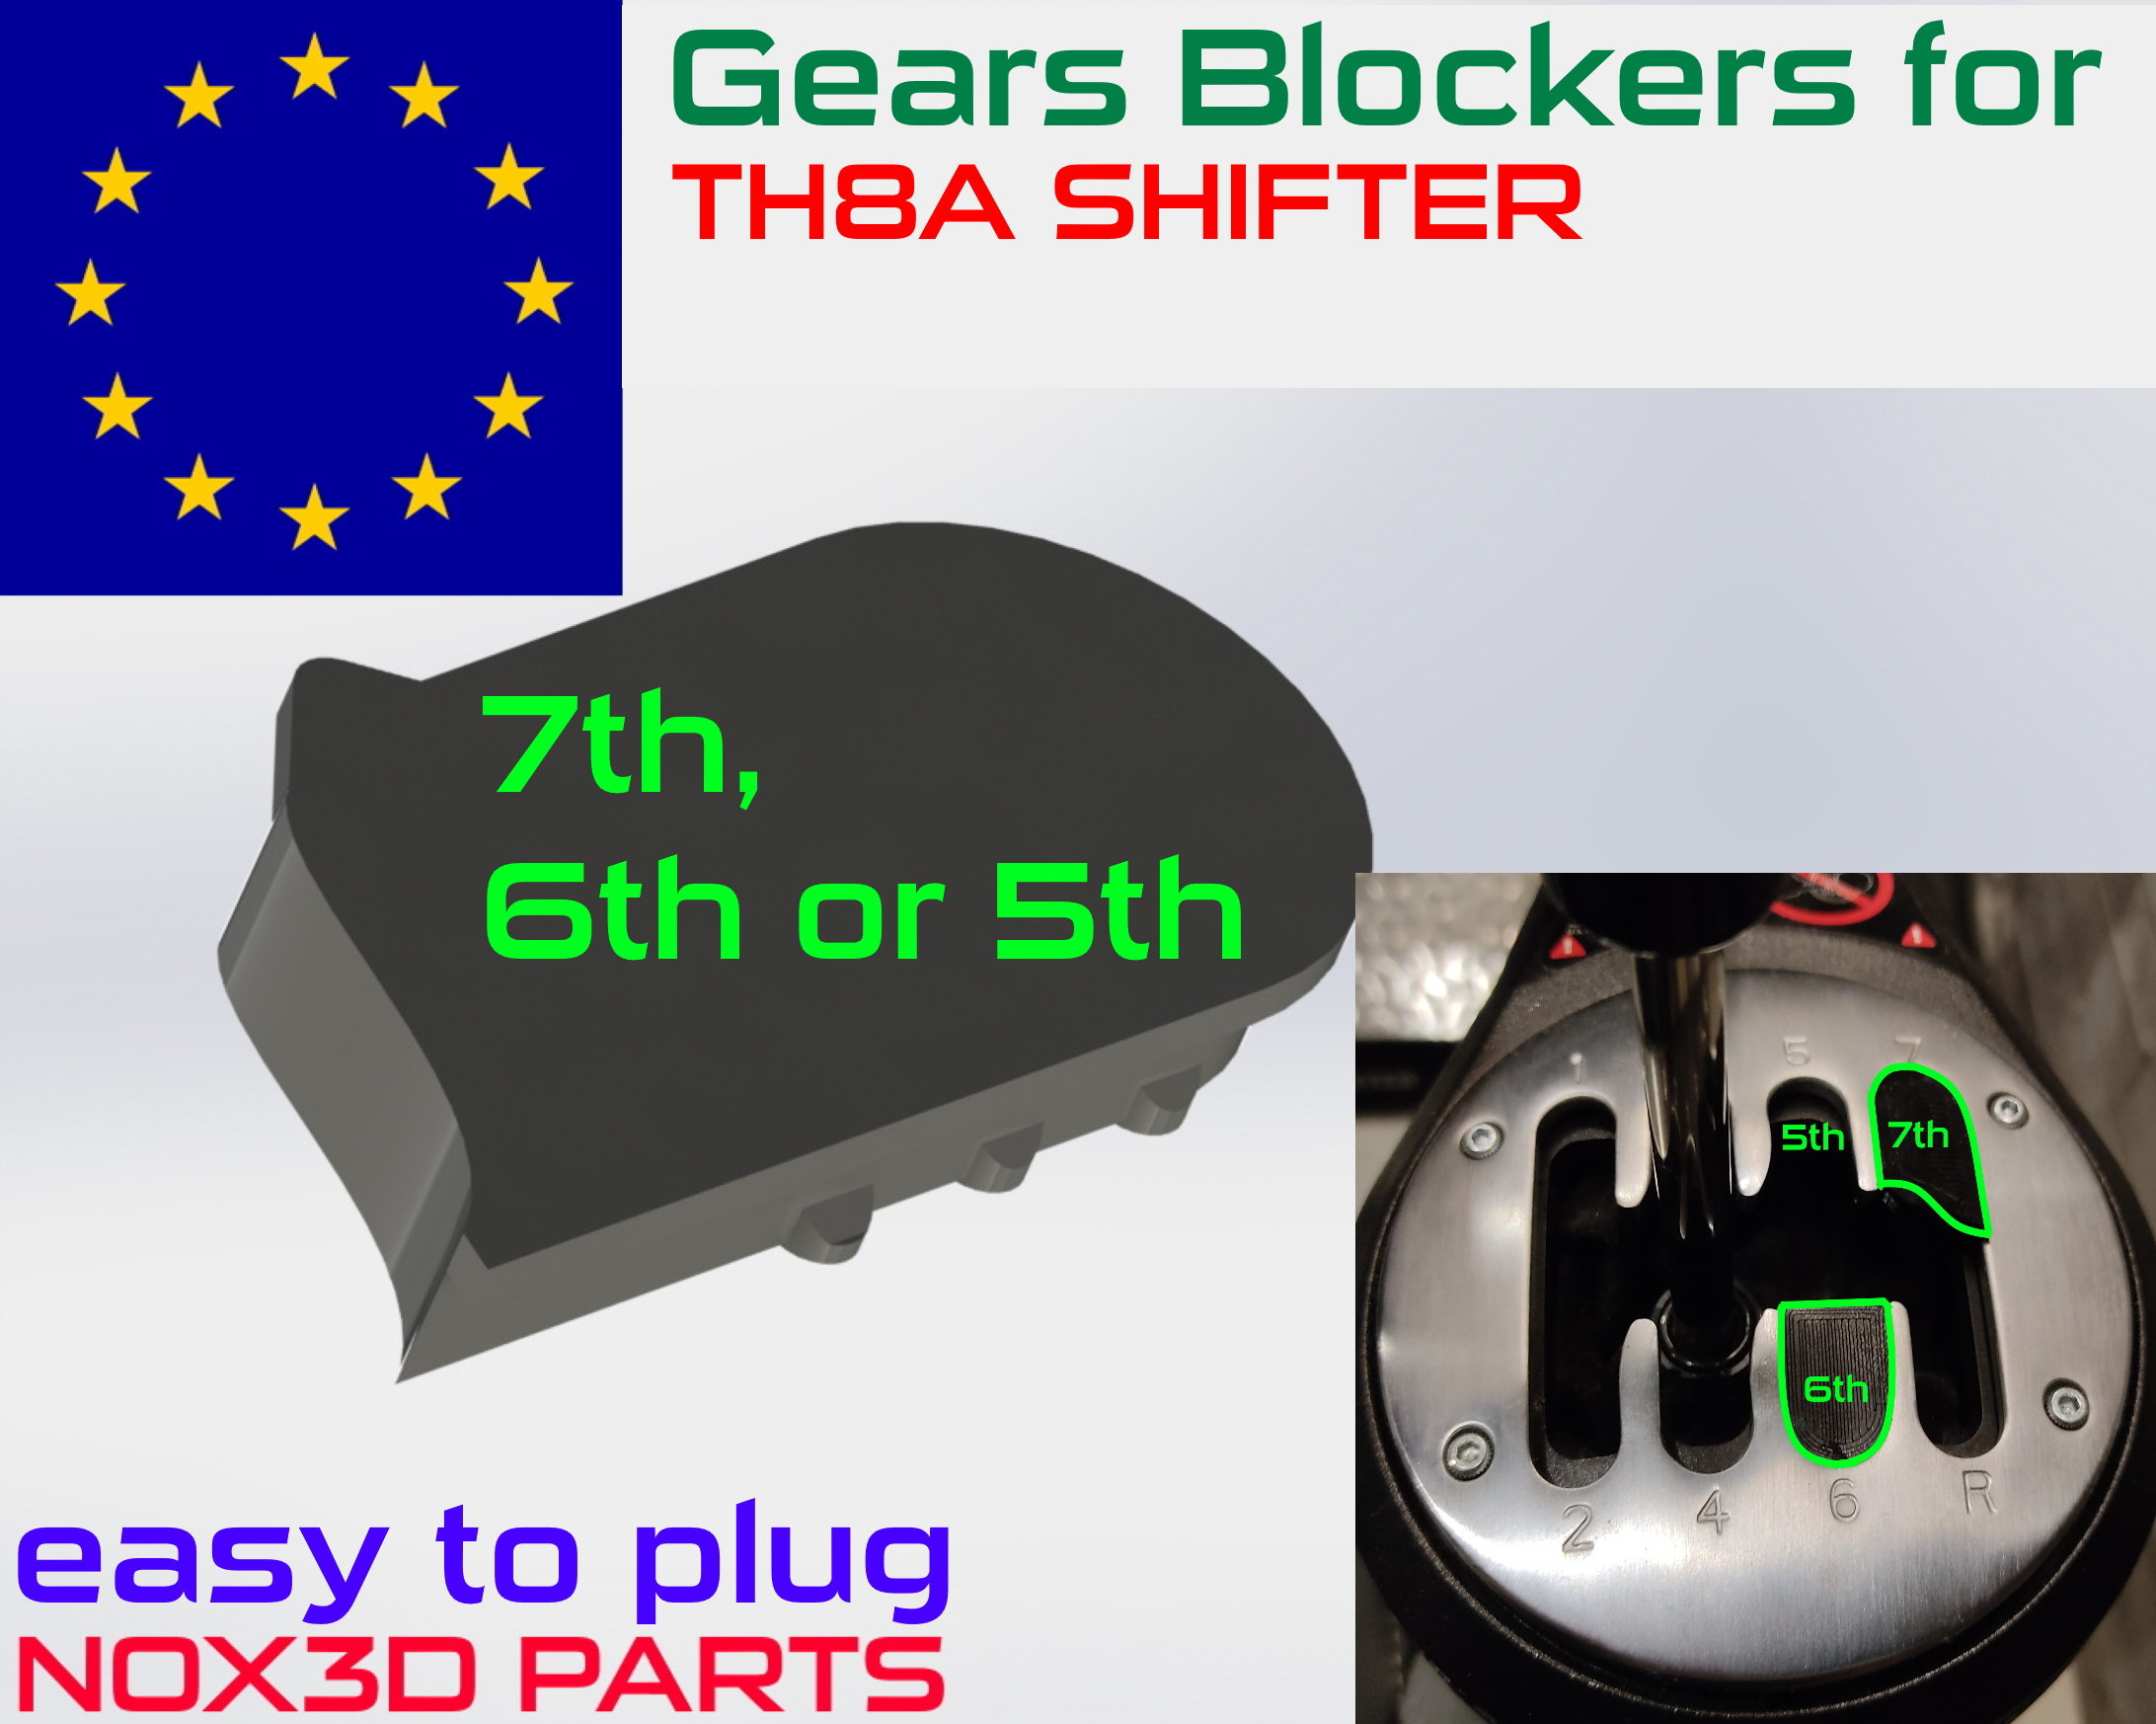 Gear Blockers Mod/add-on for Thrustmaster TH8A Gear Shifter -  UK